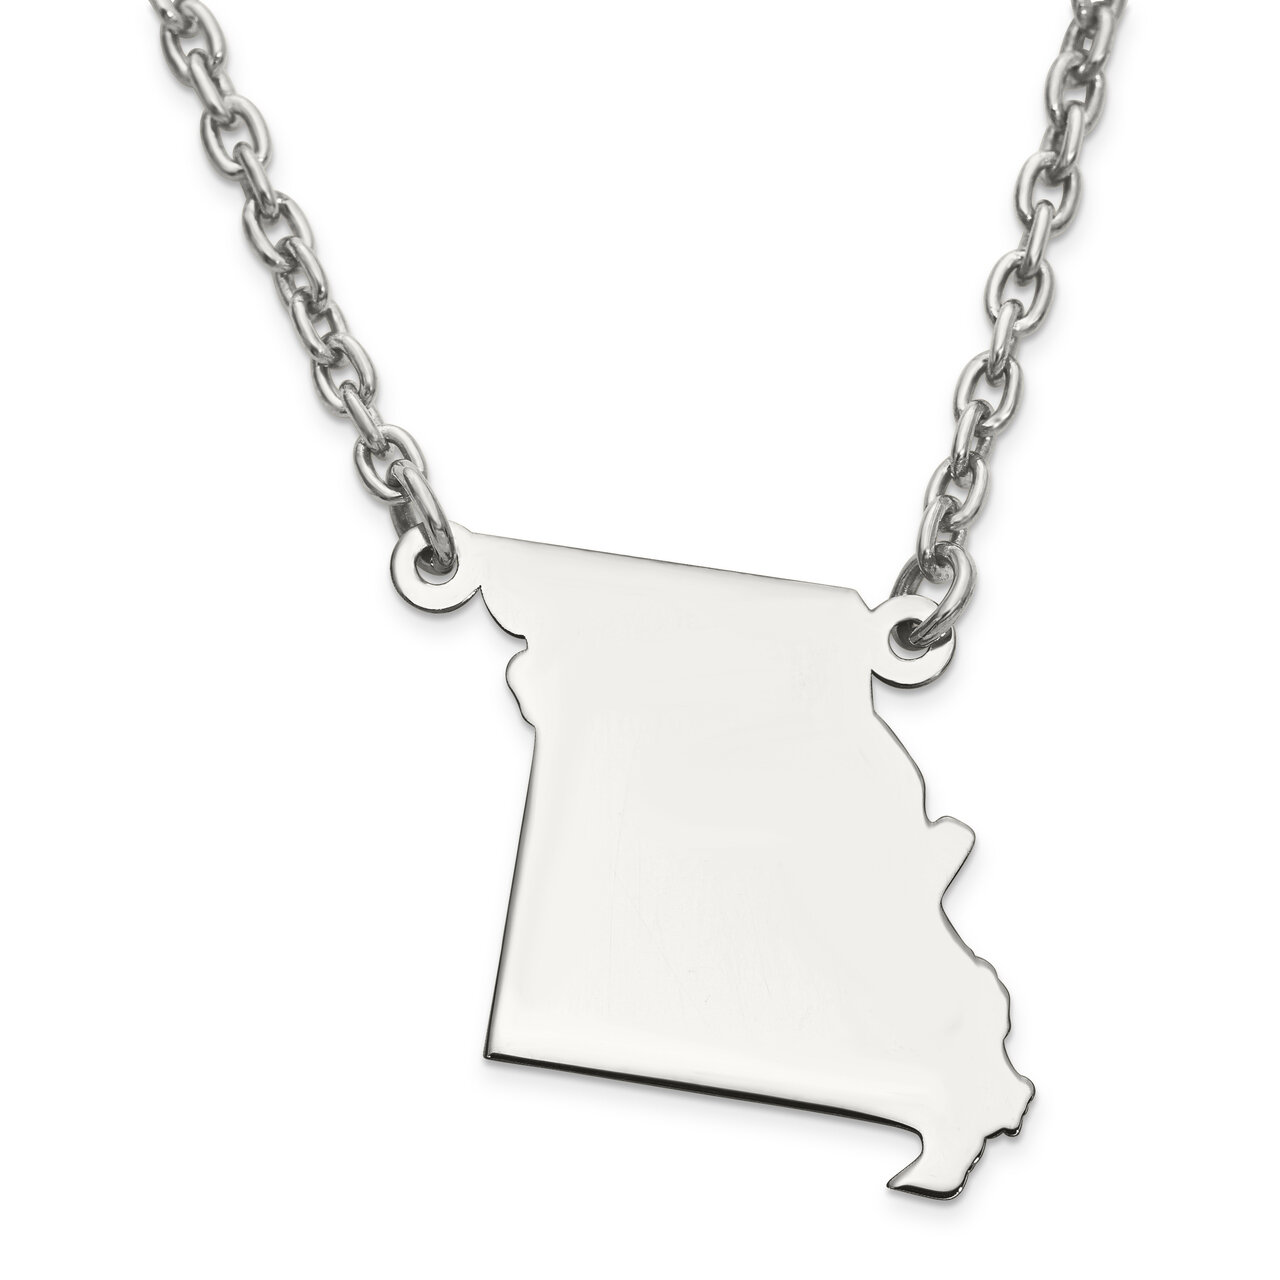 Missouri State Pendant Necklace with Chain Sterling Silver Engravable XNA706SS-MO